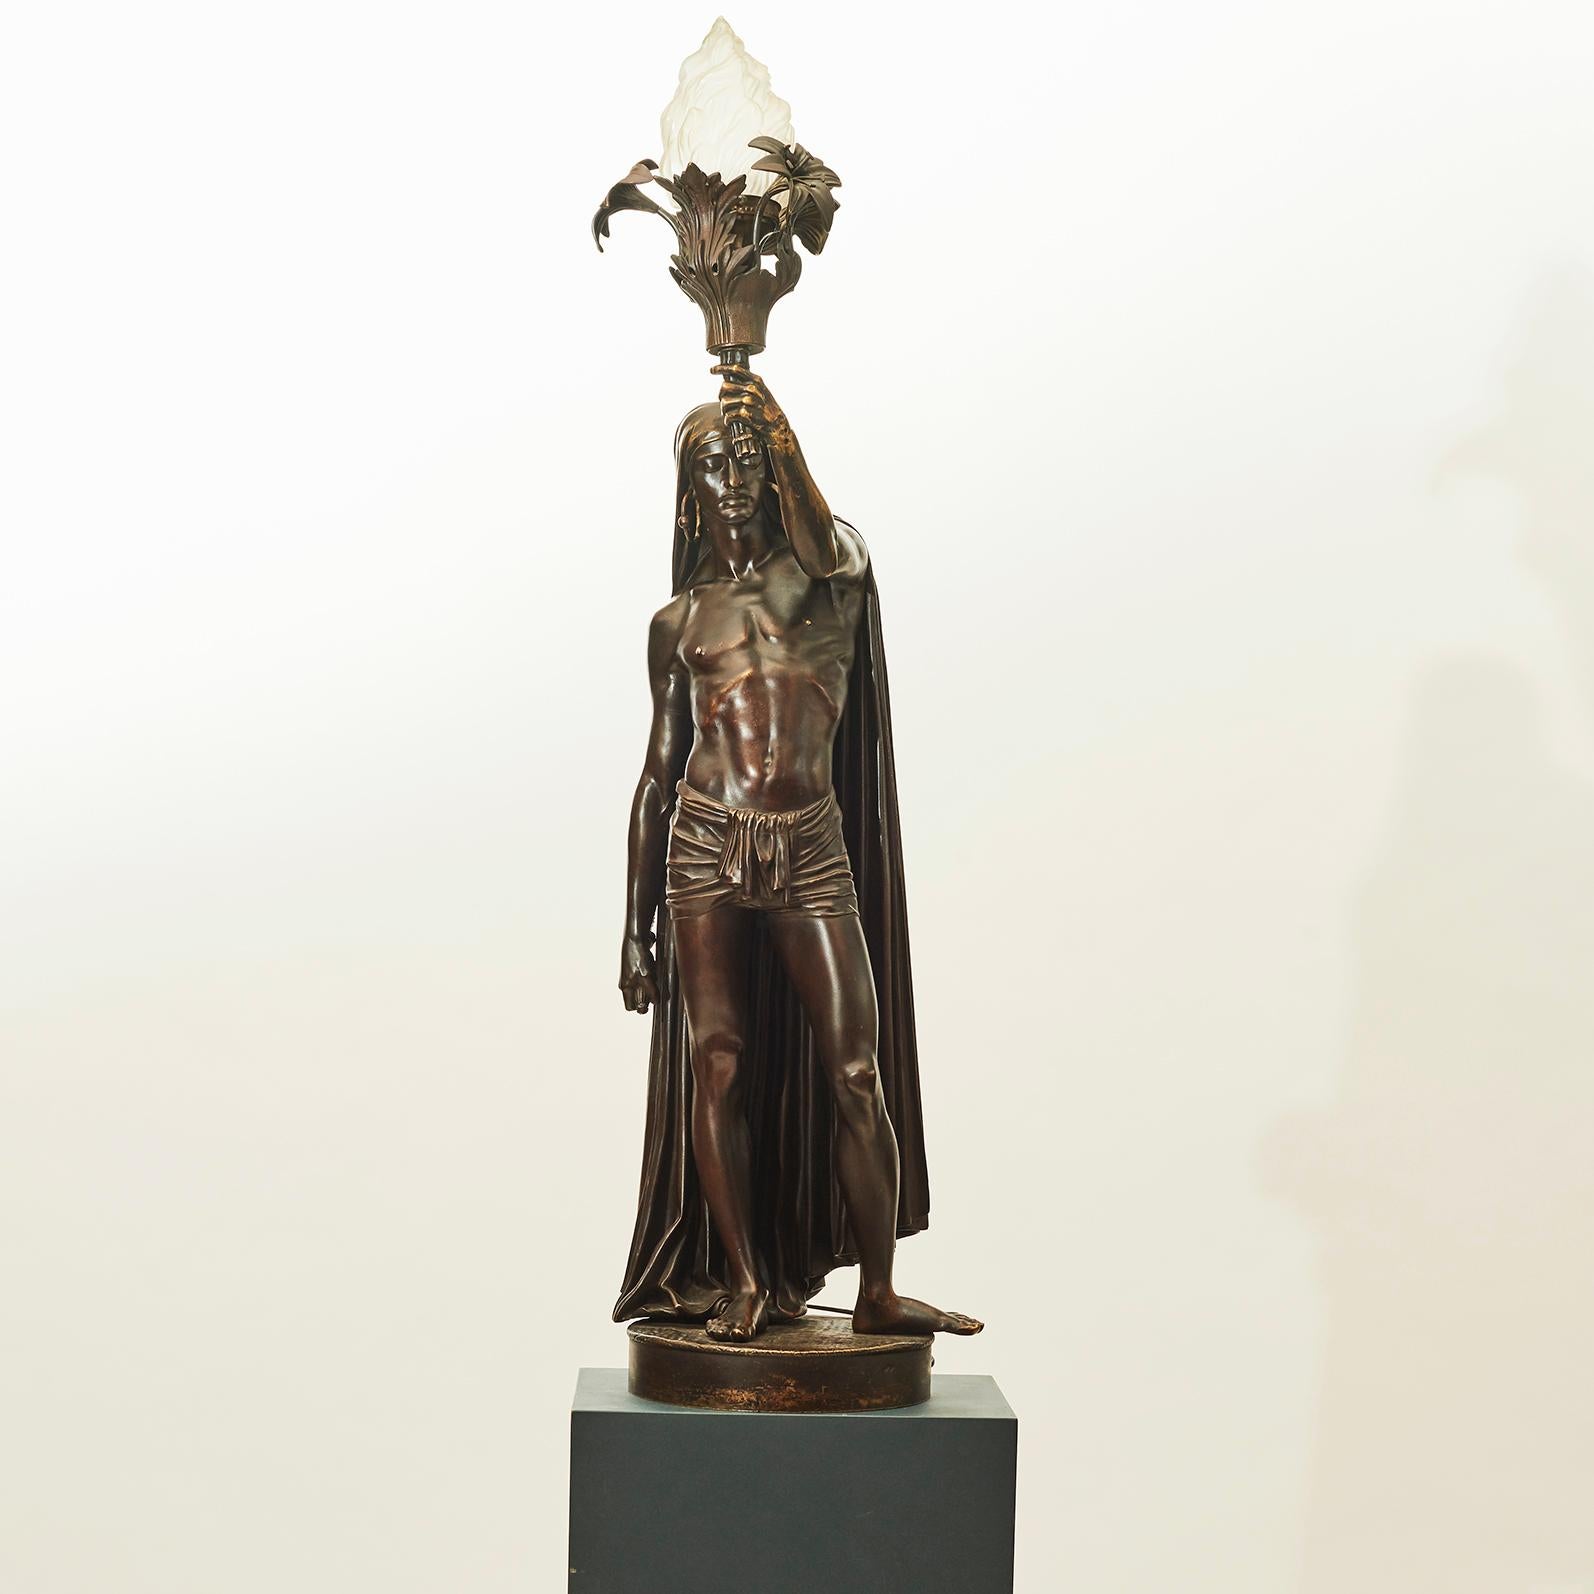 François Christophe Armand Toussaint (1806-1862).
A beautiful patinated bronze figure lamp representing an American Indian, wearing a draped headdress, robe and a pendant hooped earring. Signed to the plinth ‘Graux Marly, Ft. de Bronzes, 8 Rúe Du